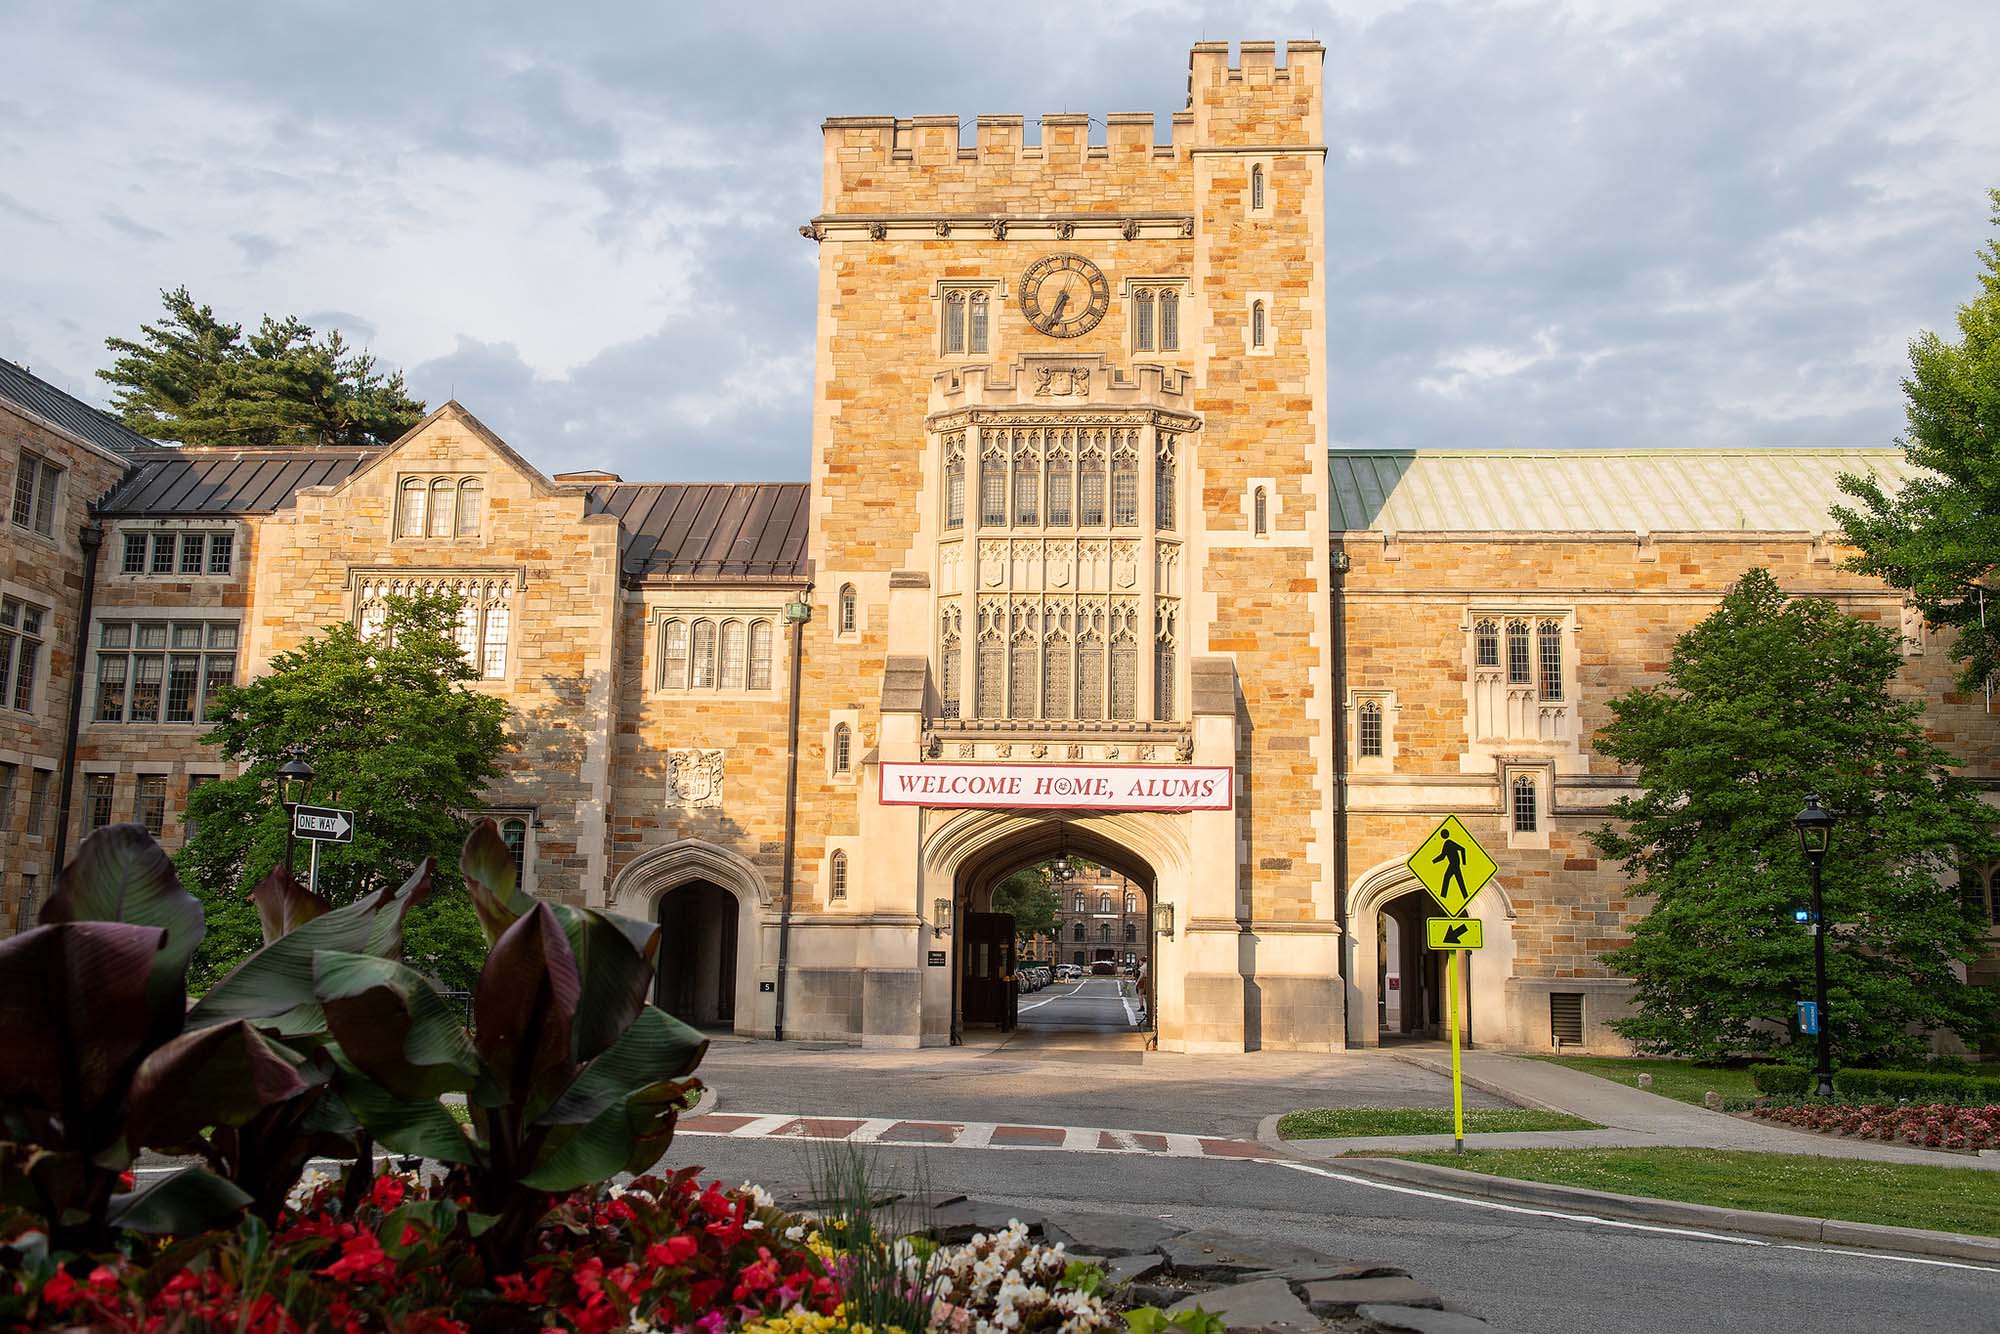 The Main Gate entrance to Vassar College, a large brick building with a tower over an archway wide enough for a vehicle, surrounded by greenery, in the late afternoon sunlight.